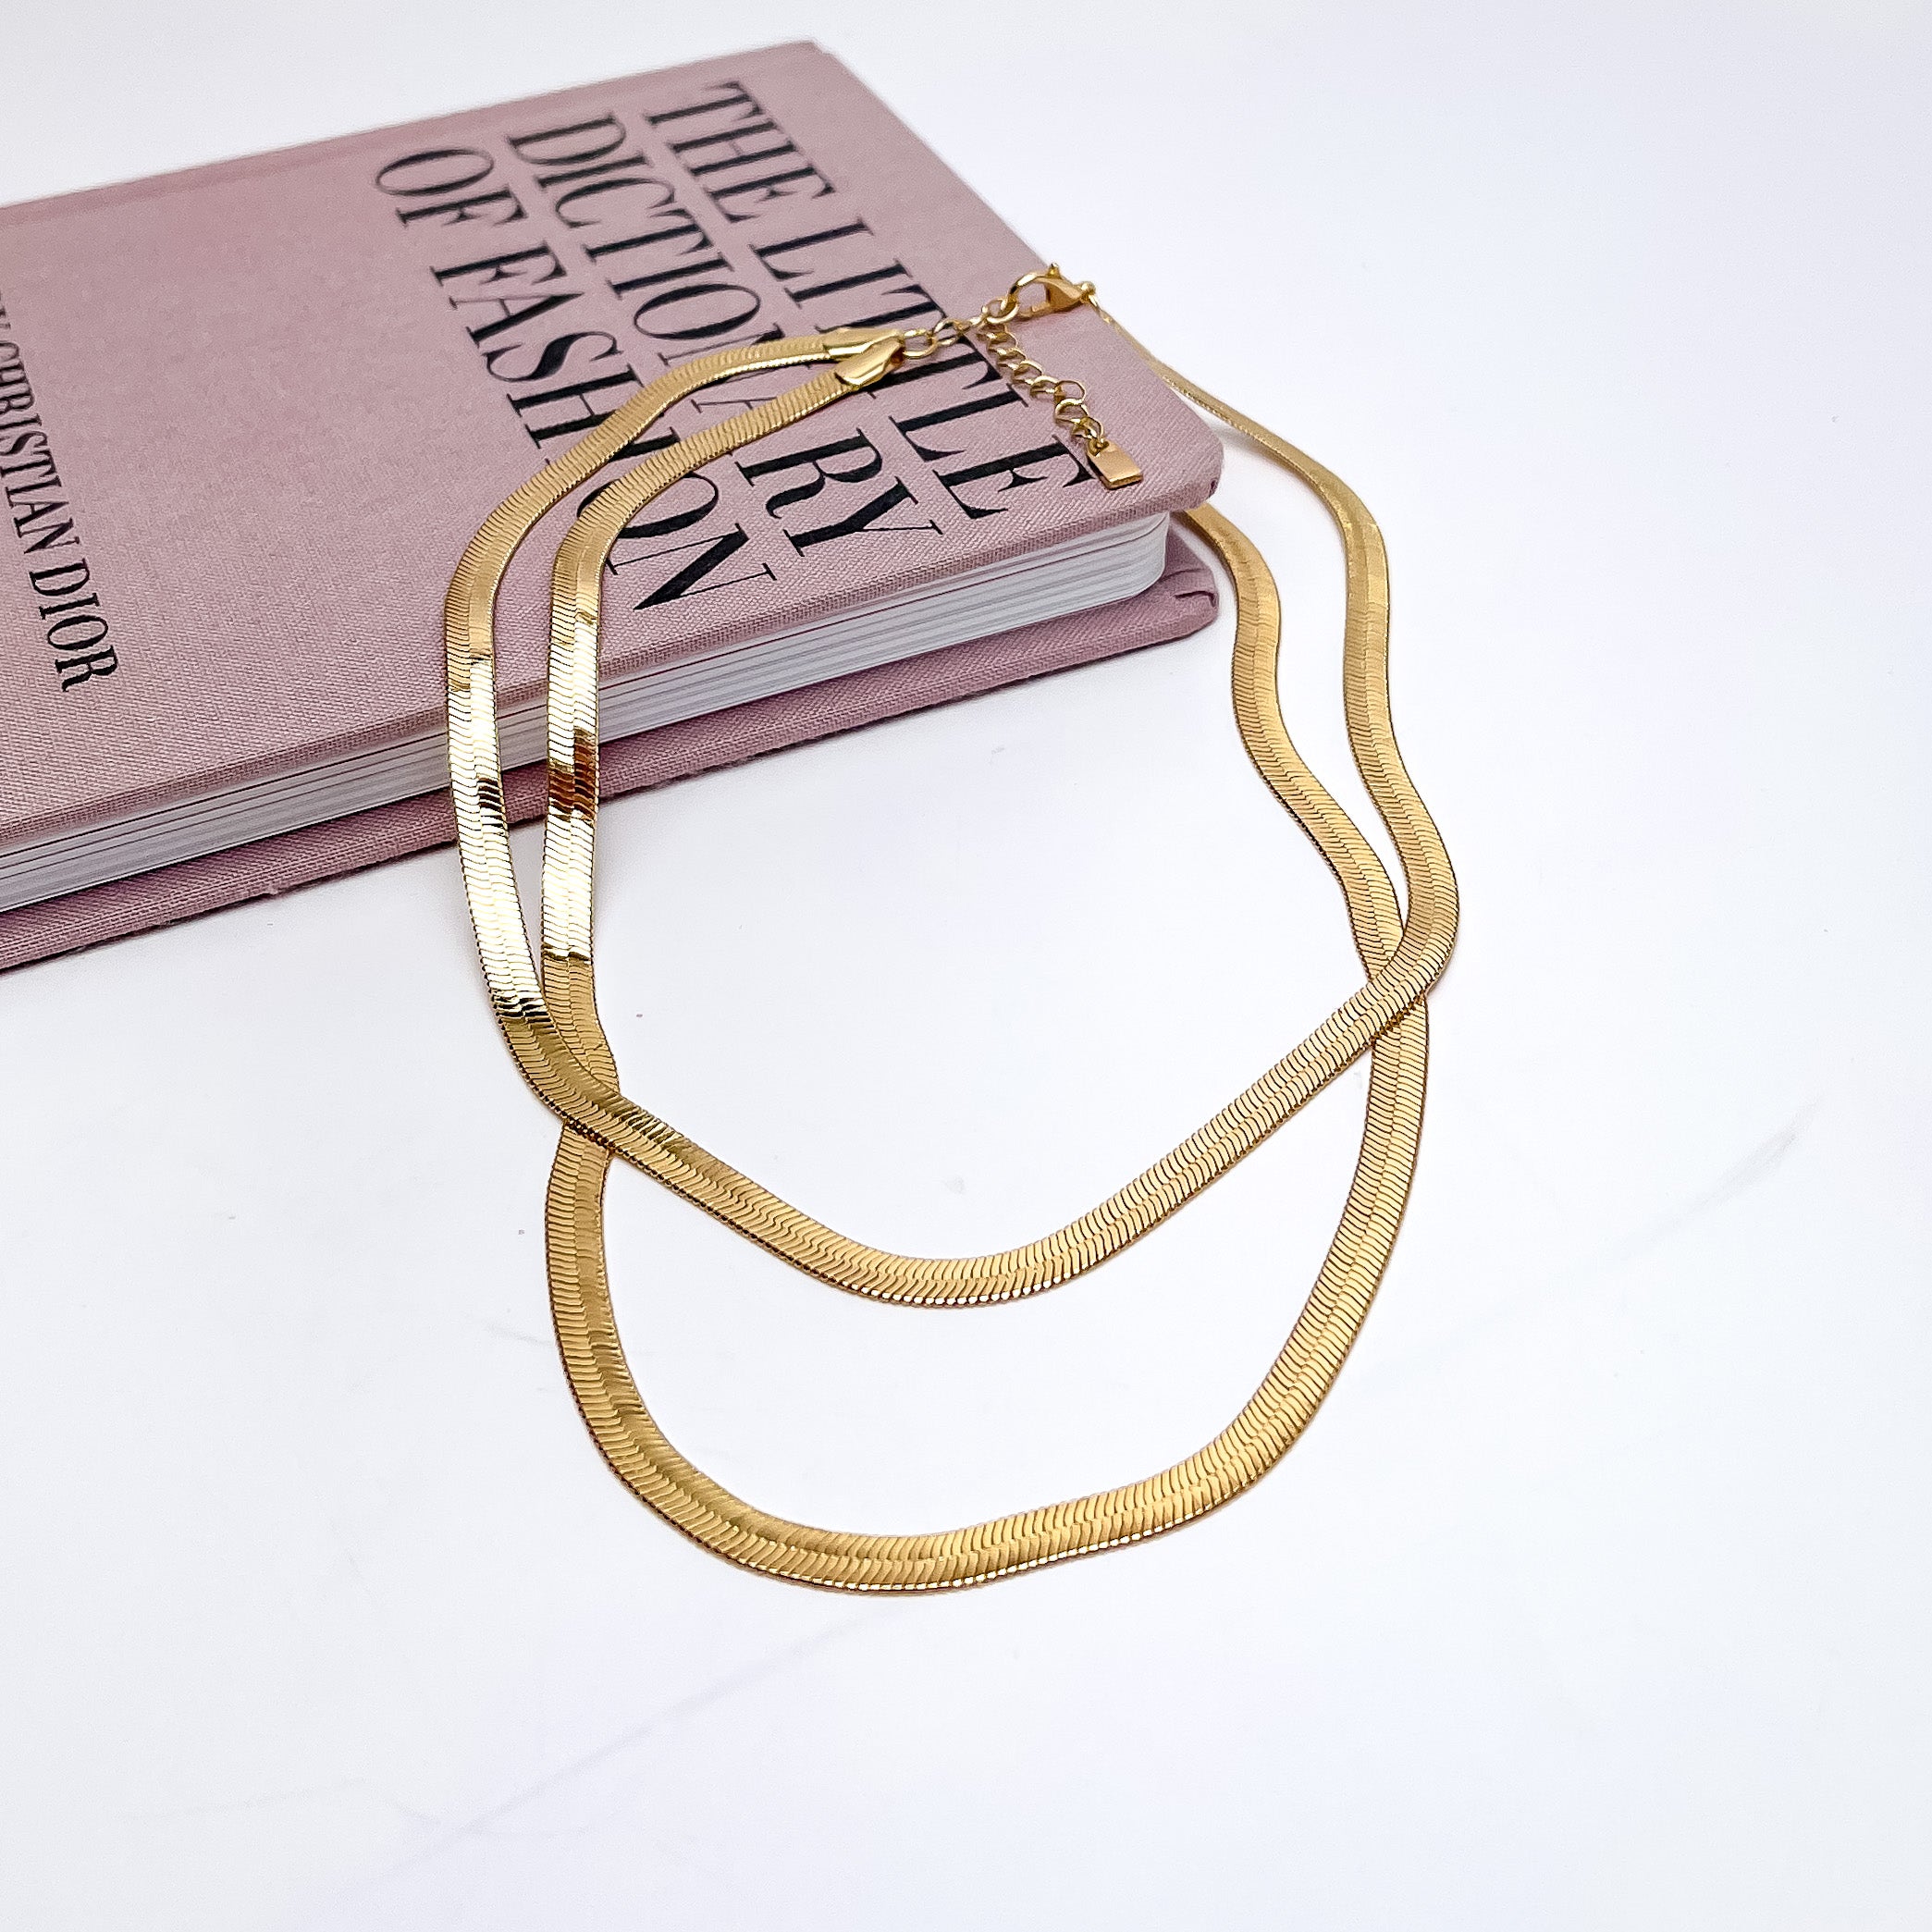 Night Life Double layered Gold Tone Chain Necklace. the necklace is pictured on a white background with part of it on a pink book.